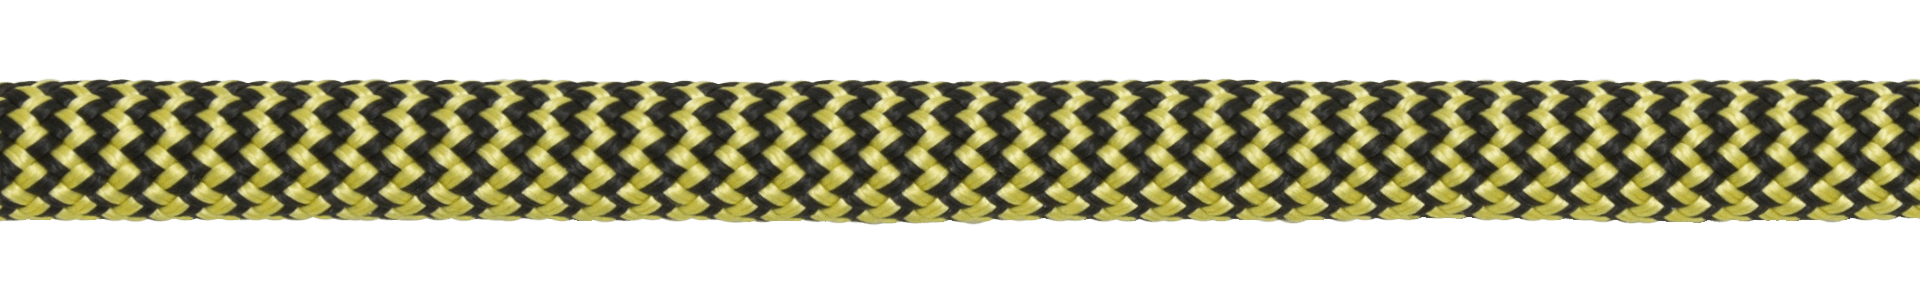 Southern Ropes' Climbing Rope: Response Dynamic Rope